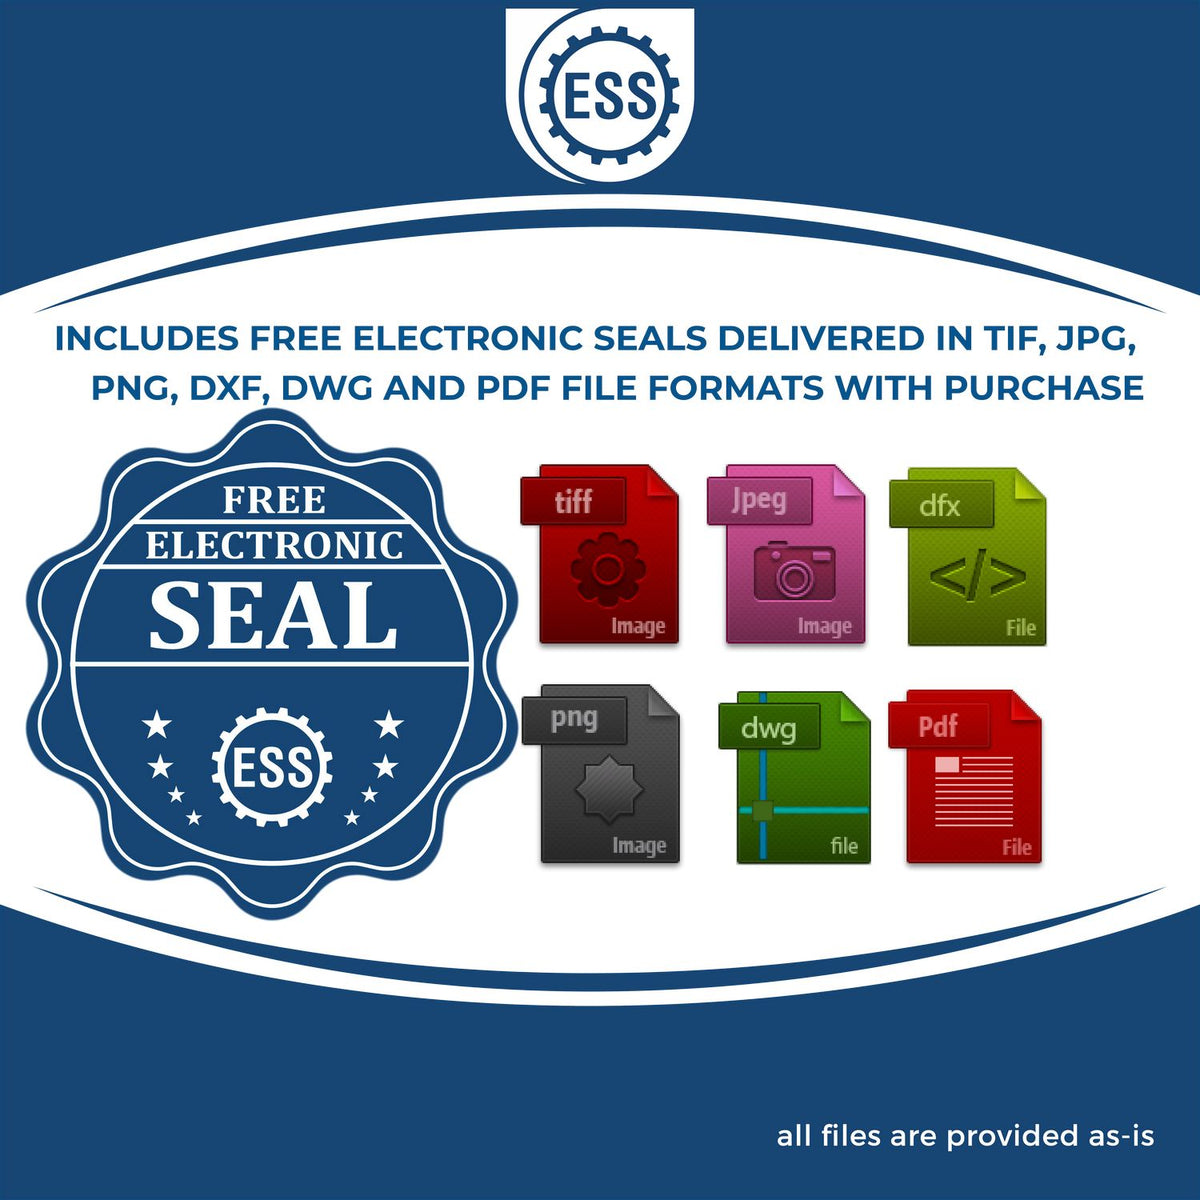 An infographic for the free electronic seal for the Georgia Desk Architect Embossing Seal illustrating the different file type icons such as DXF, DWG, TIF, JPG and PNG.